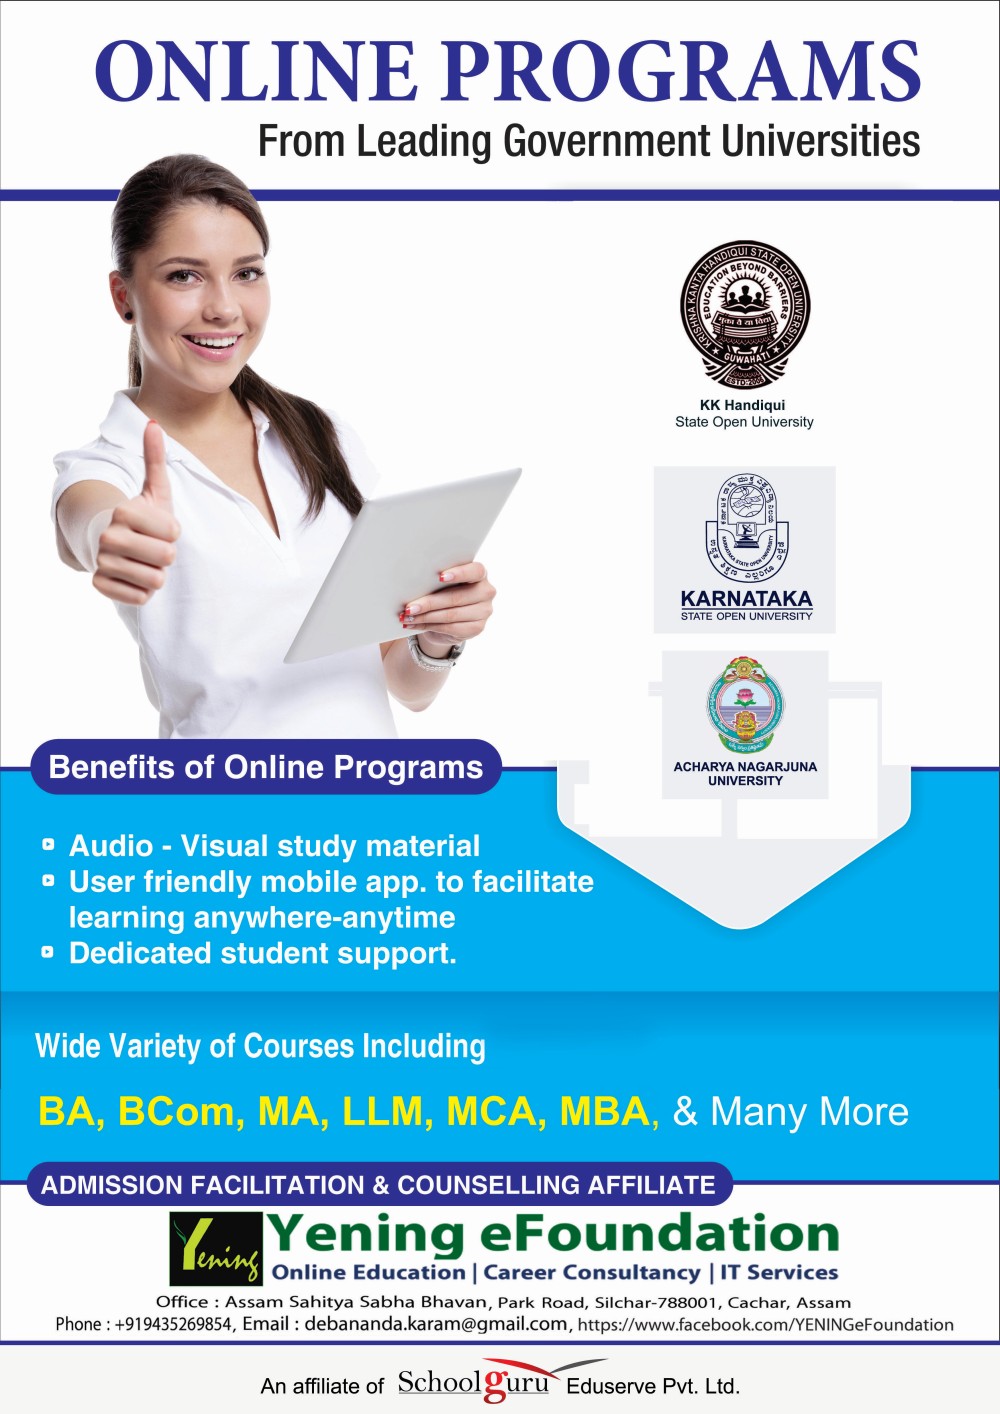 Admissions open for online programs from leading government universities at Yening eFoundation